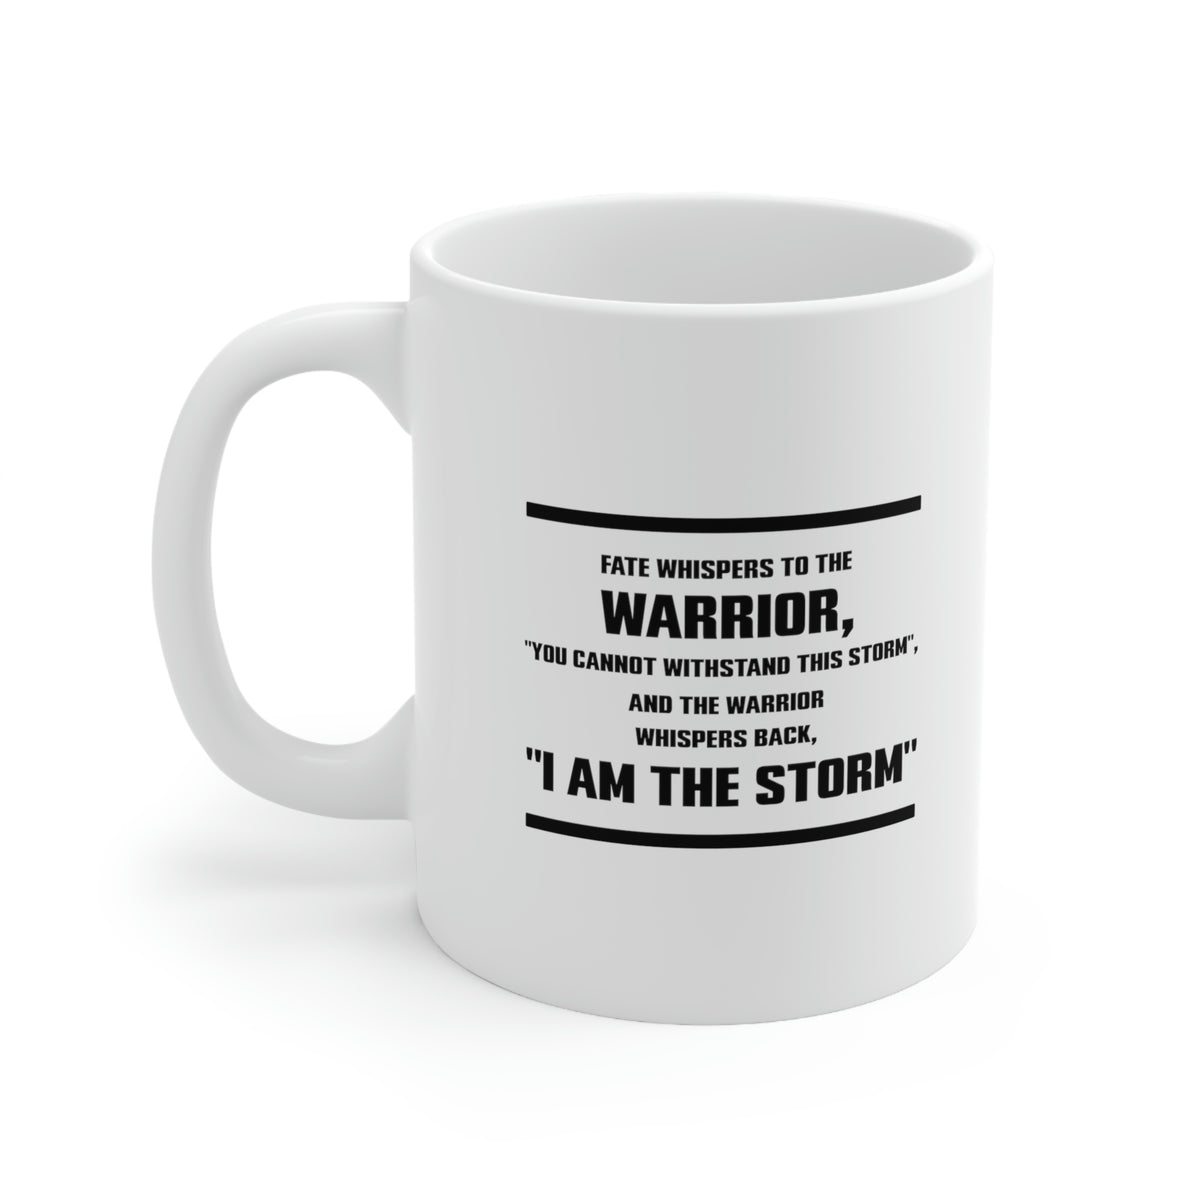 Fate Whispers To The Warrior, “You Cannot Withstand This Storm”, And The Warrior Whispers Back, “I Am The Storm” - Perfect Tea Cup & Coffee Mug For Army